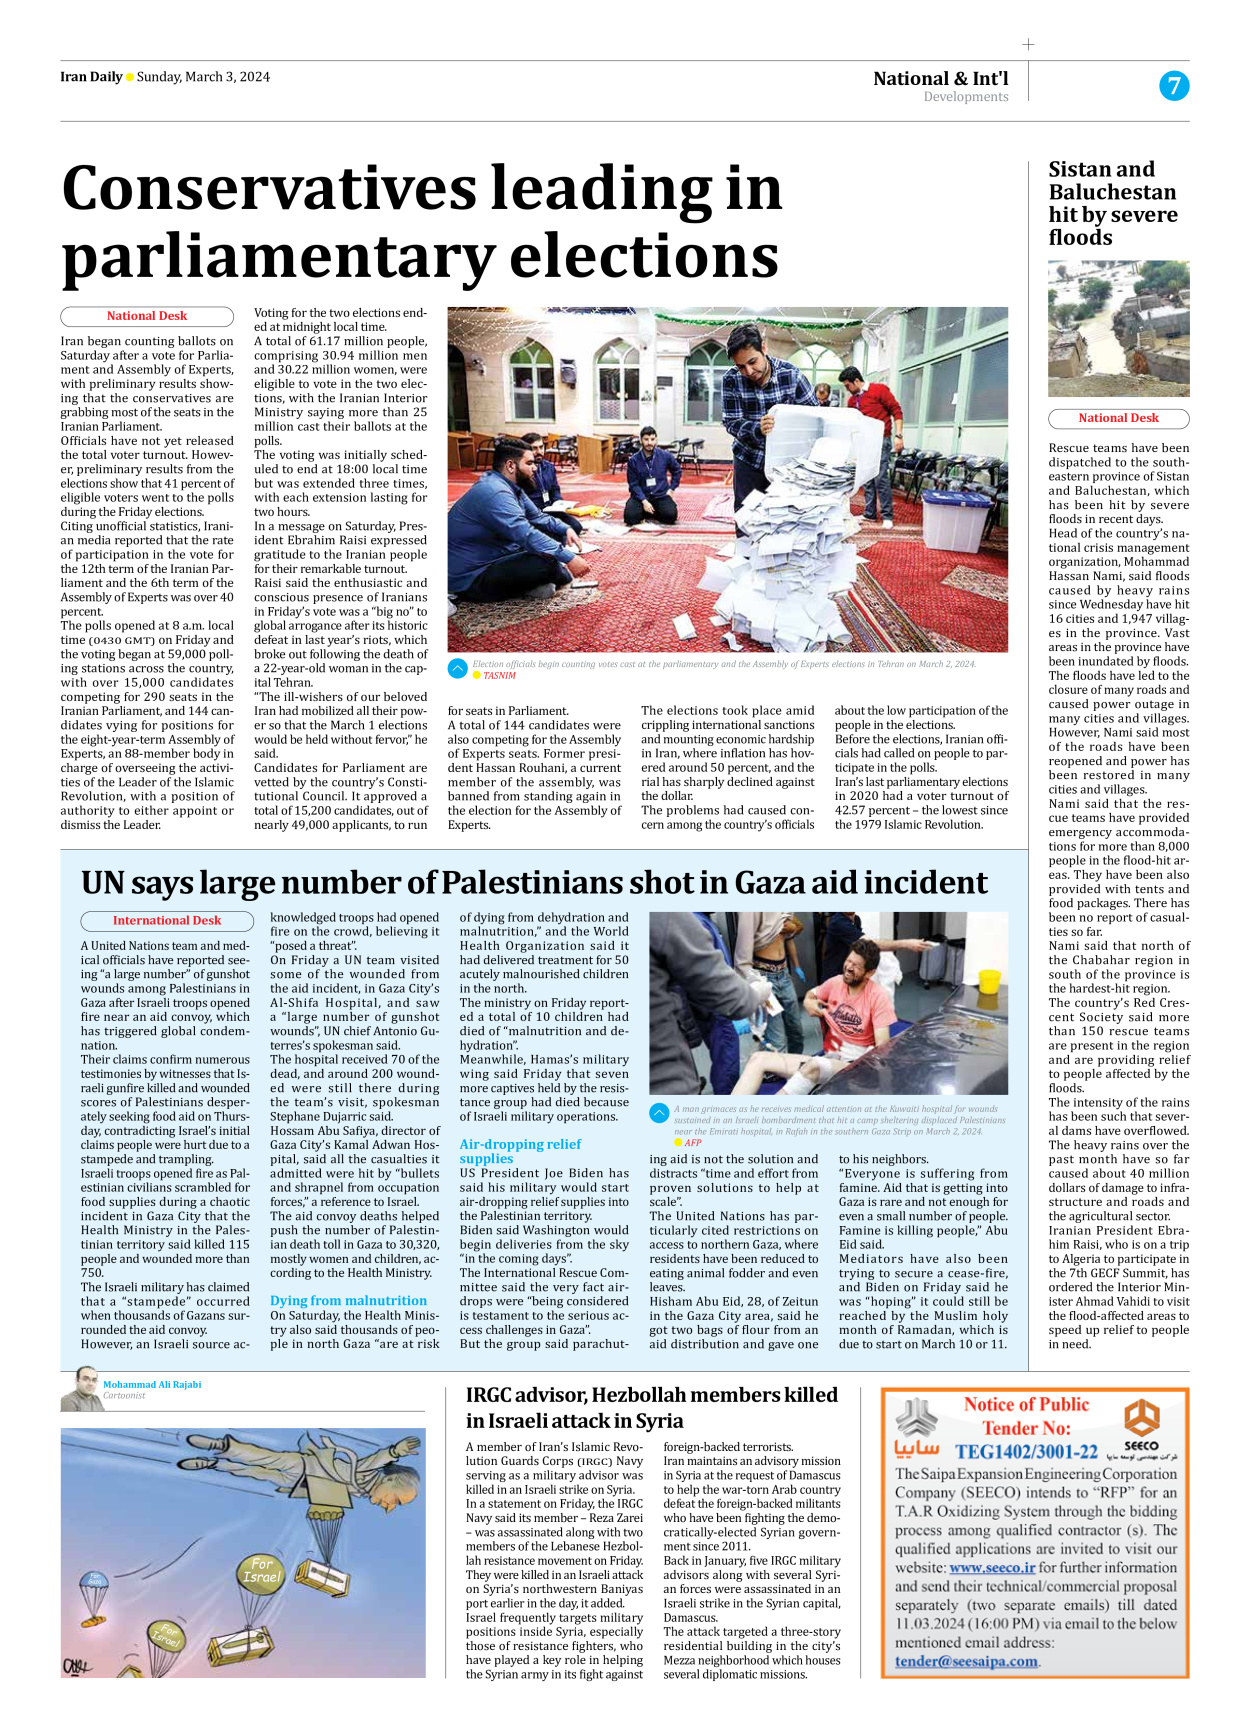 Iran Daily - Number Seven Thousand Five Hundred and Twenty - 03 March 2024 - Page 7